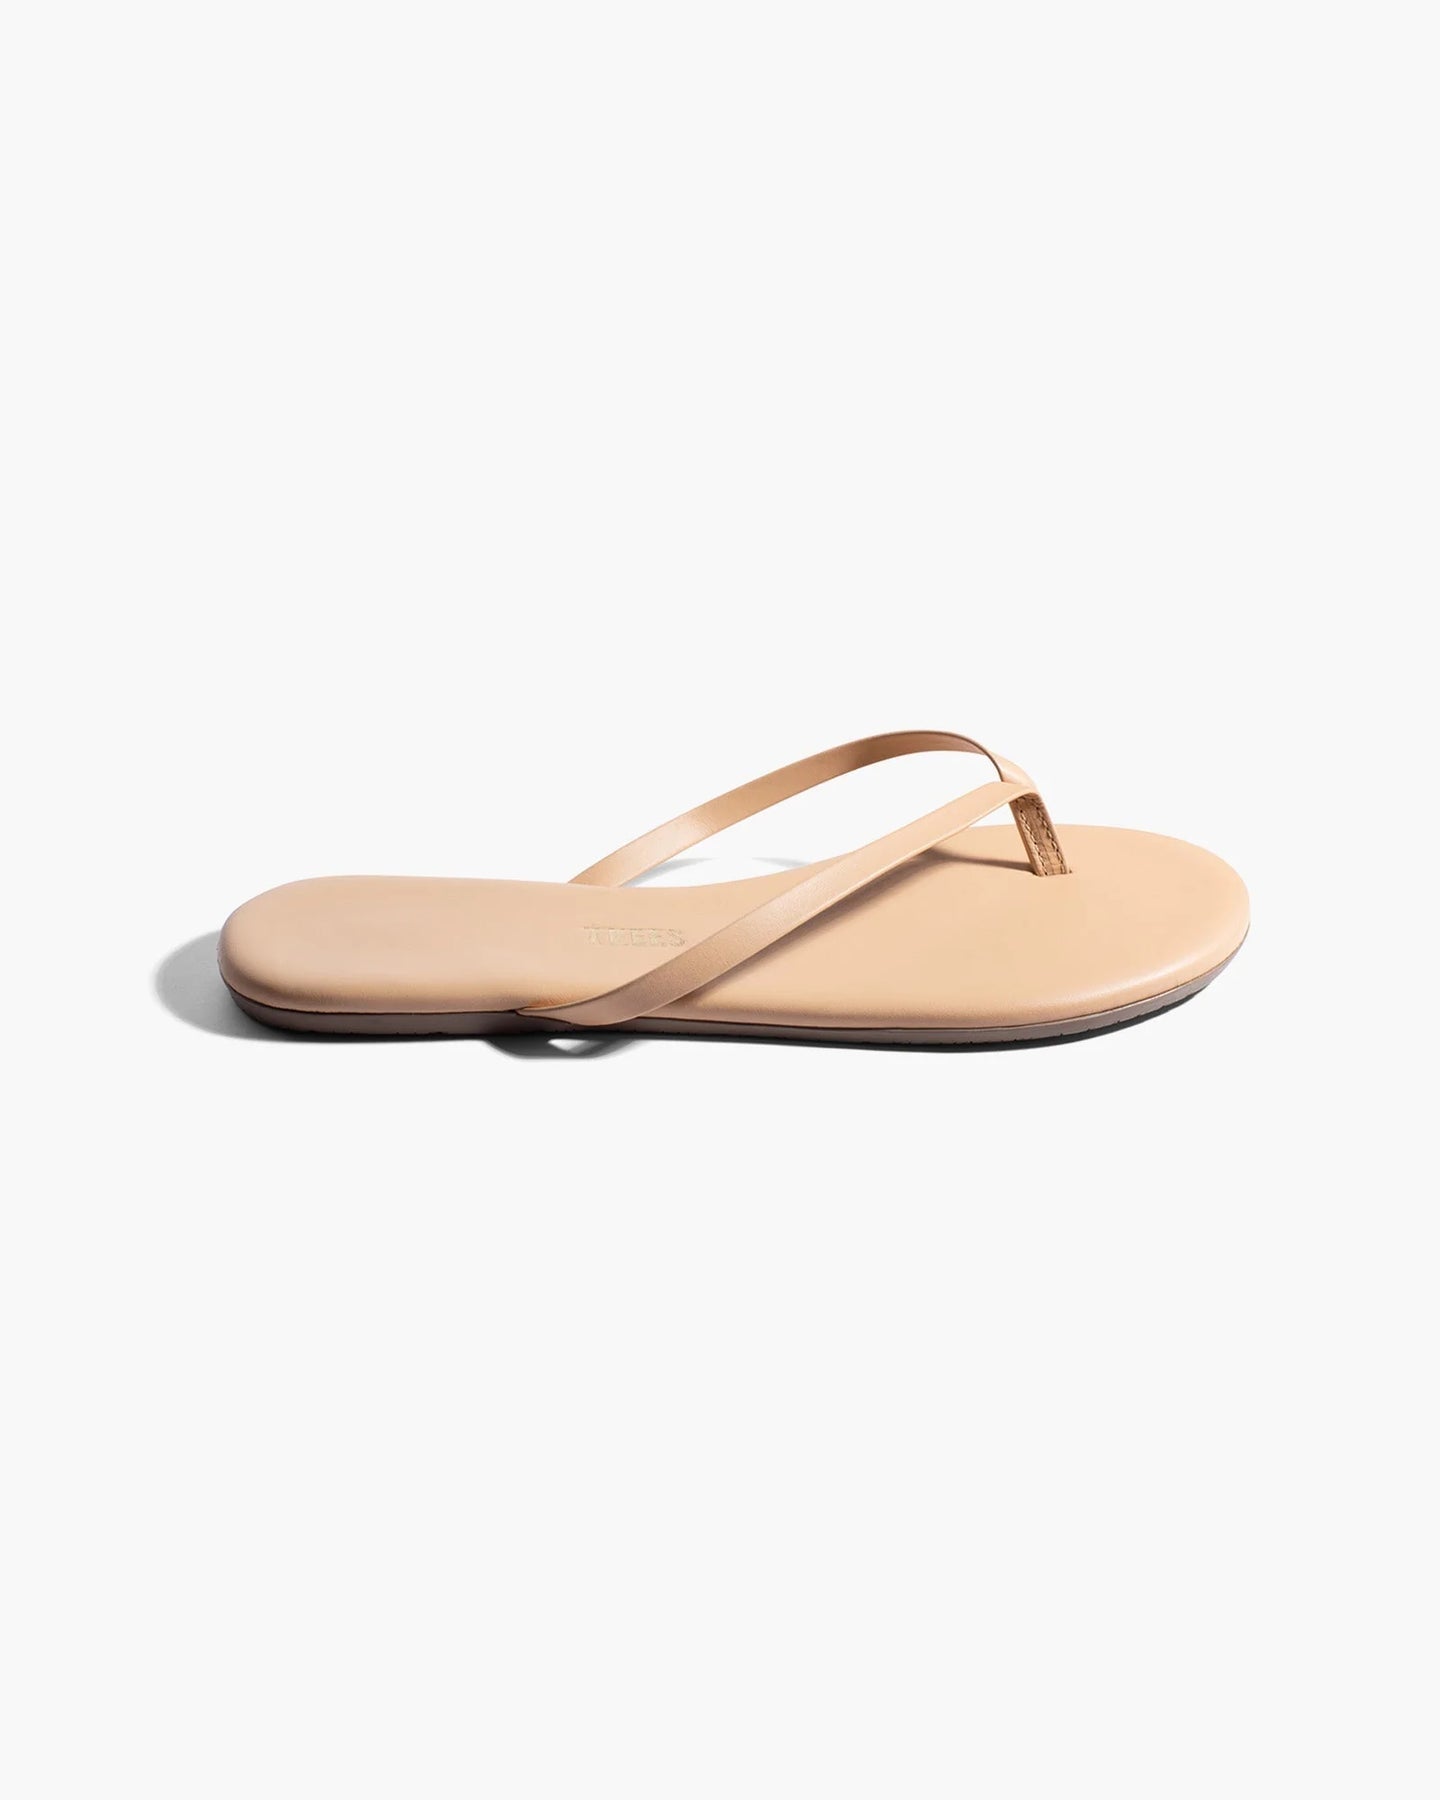 Tkees Flip Flop in Sunkissed